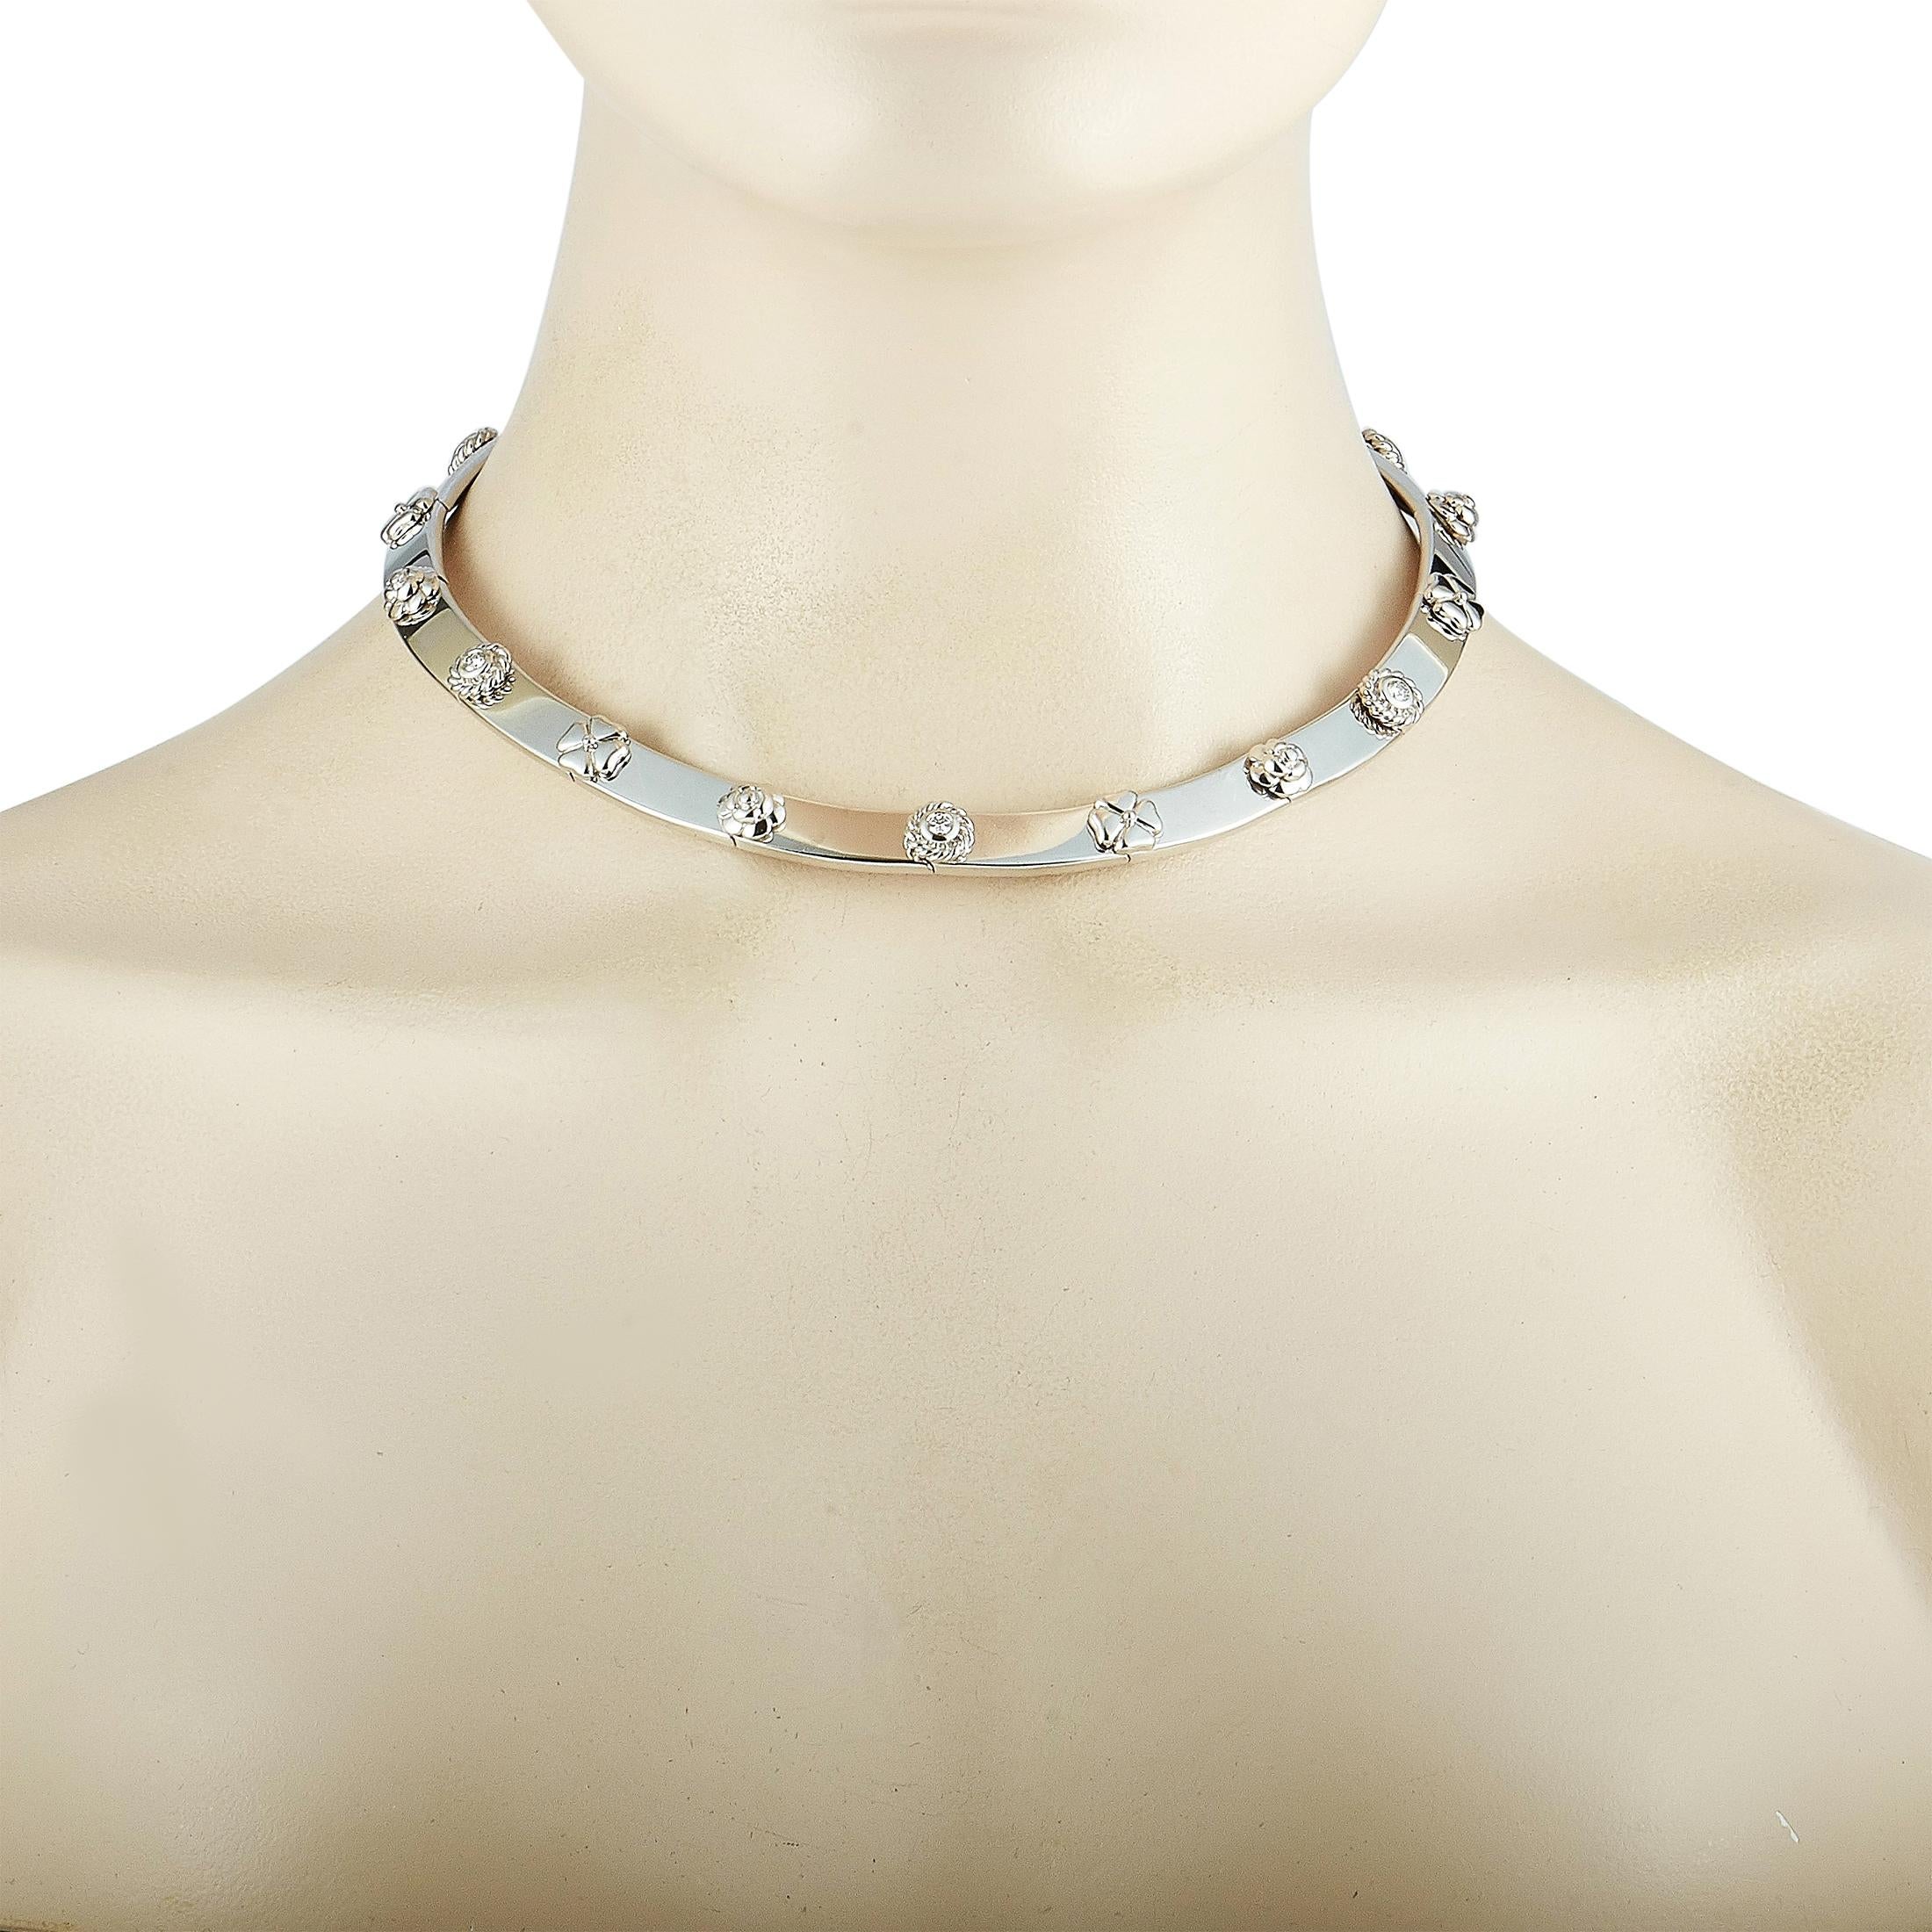 This Chanel necklace is crafted from 18K white gold and weighs 109.9 grams, measuring 15” in length. The necklace is embellished with diamonds that boast grade F color and VVS clarity and amount to 1.00 carat.

Offered in estate condition, this